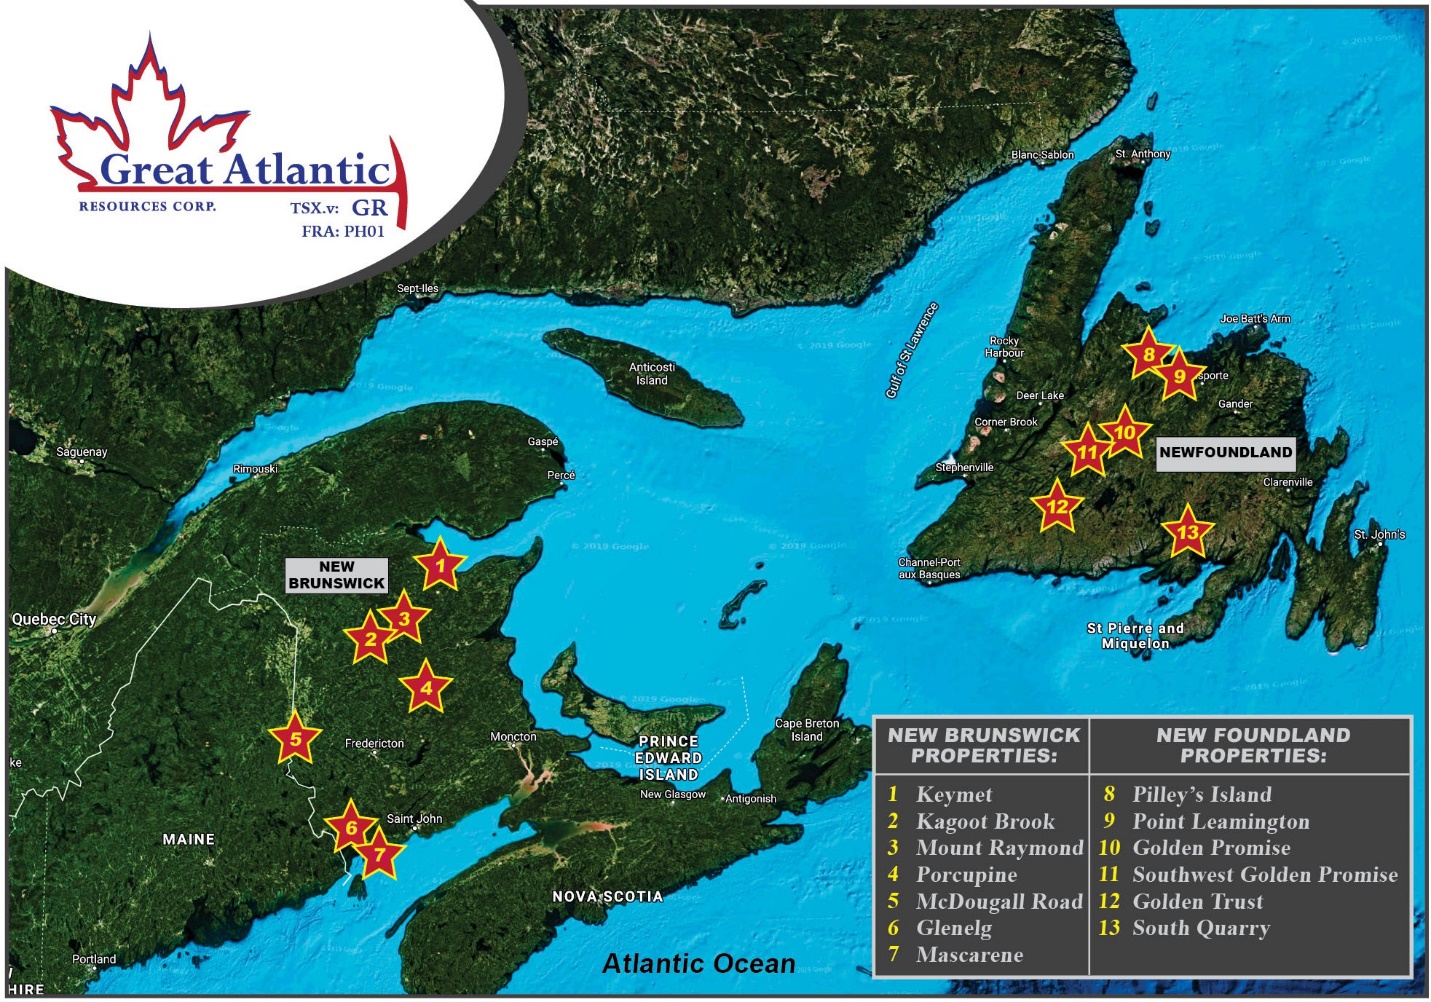 Great Atlantic Resources Corp., Friday, January 31, 2020, Press release picture